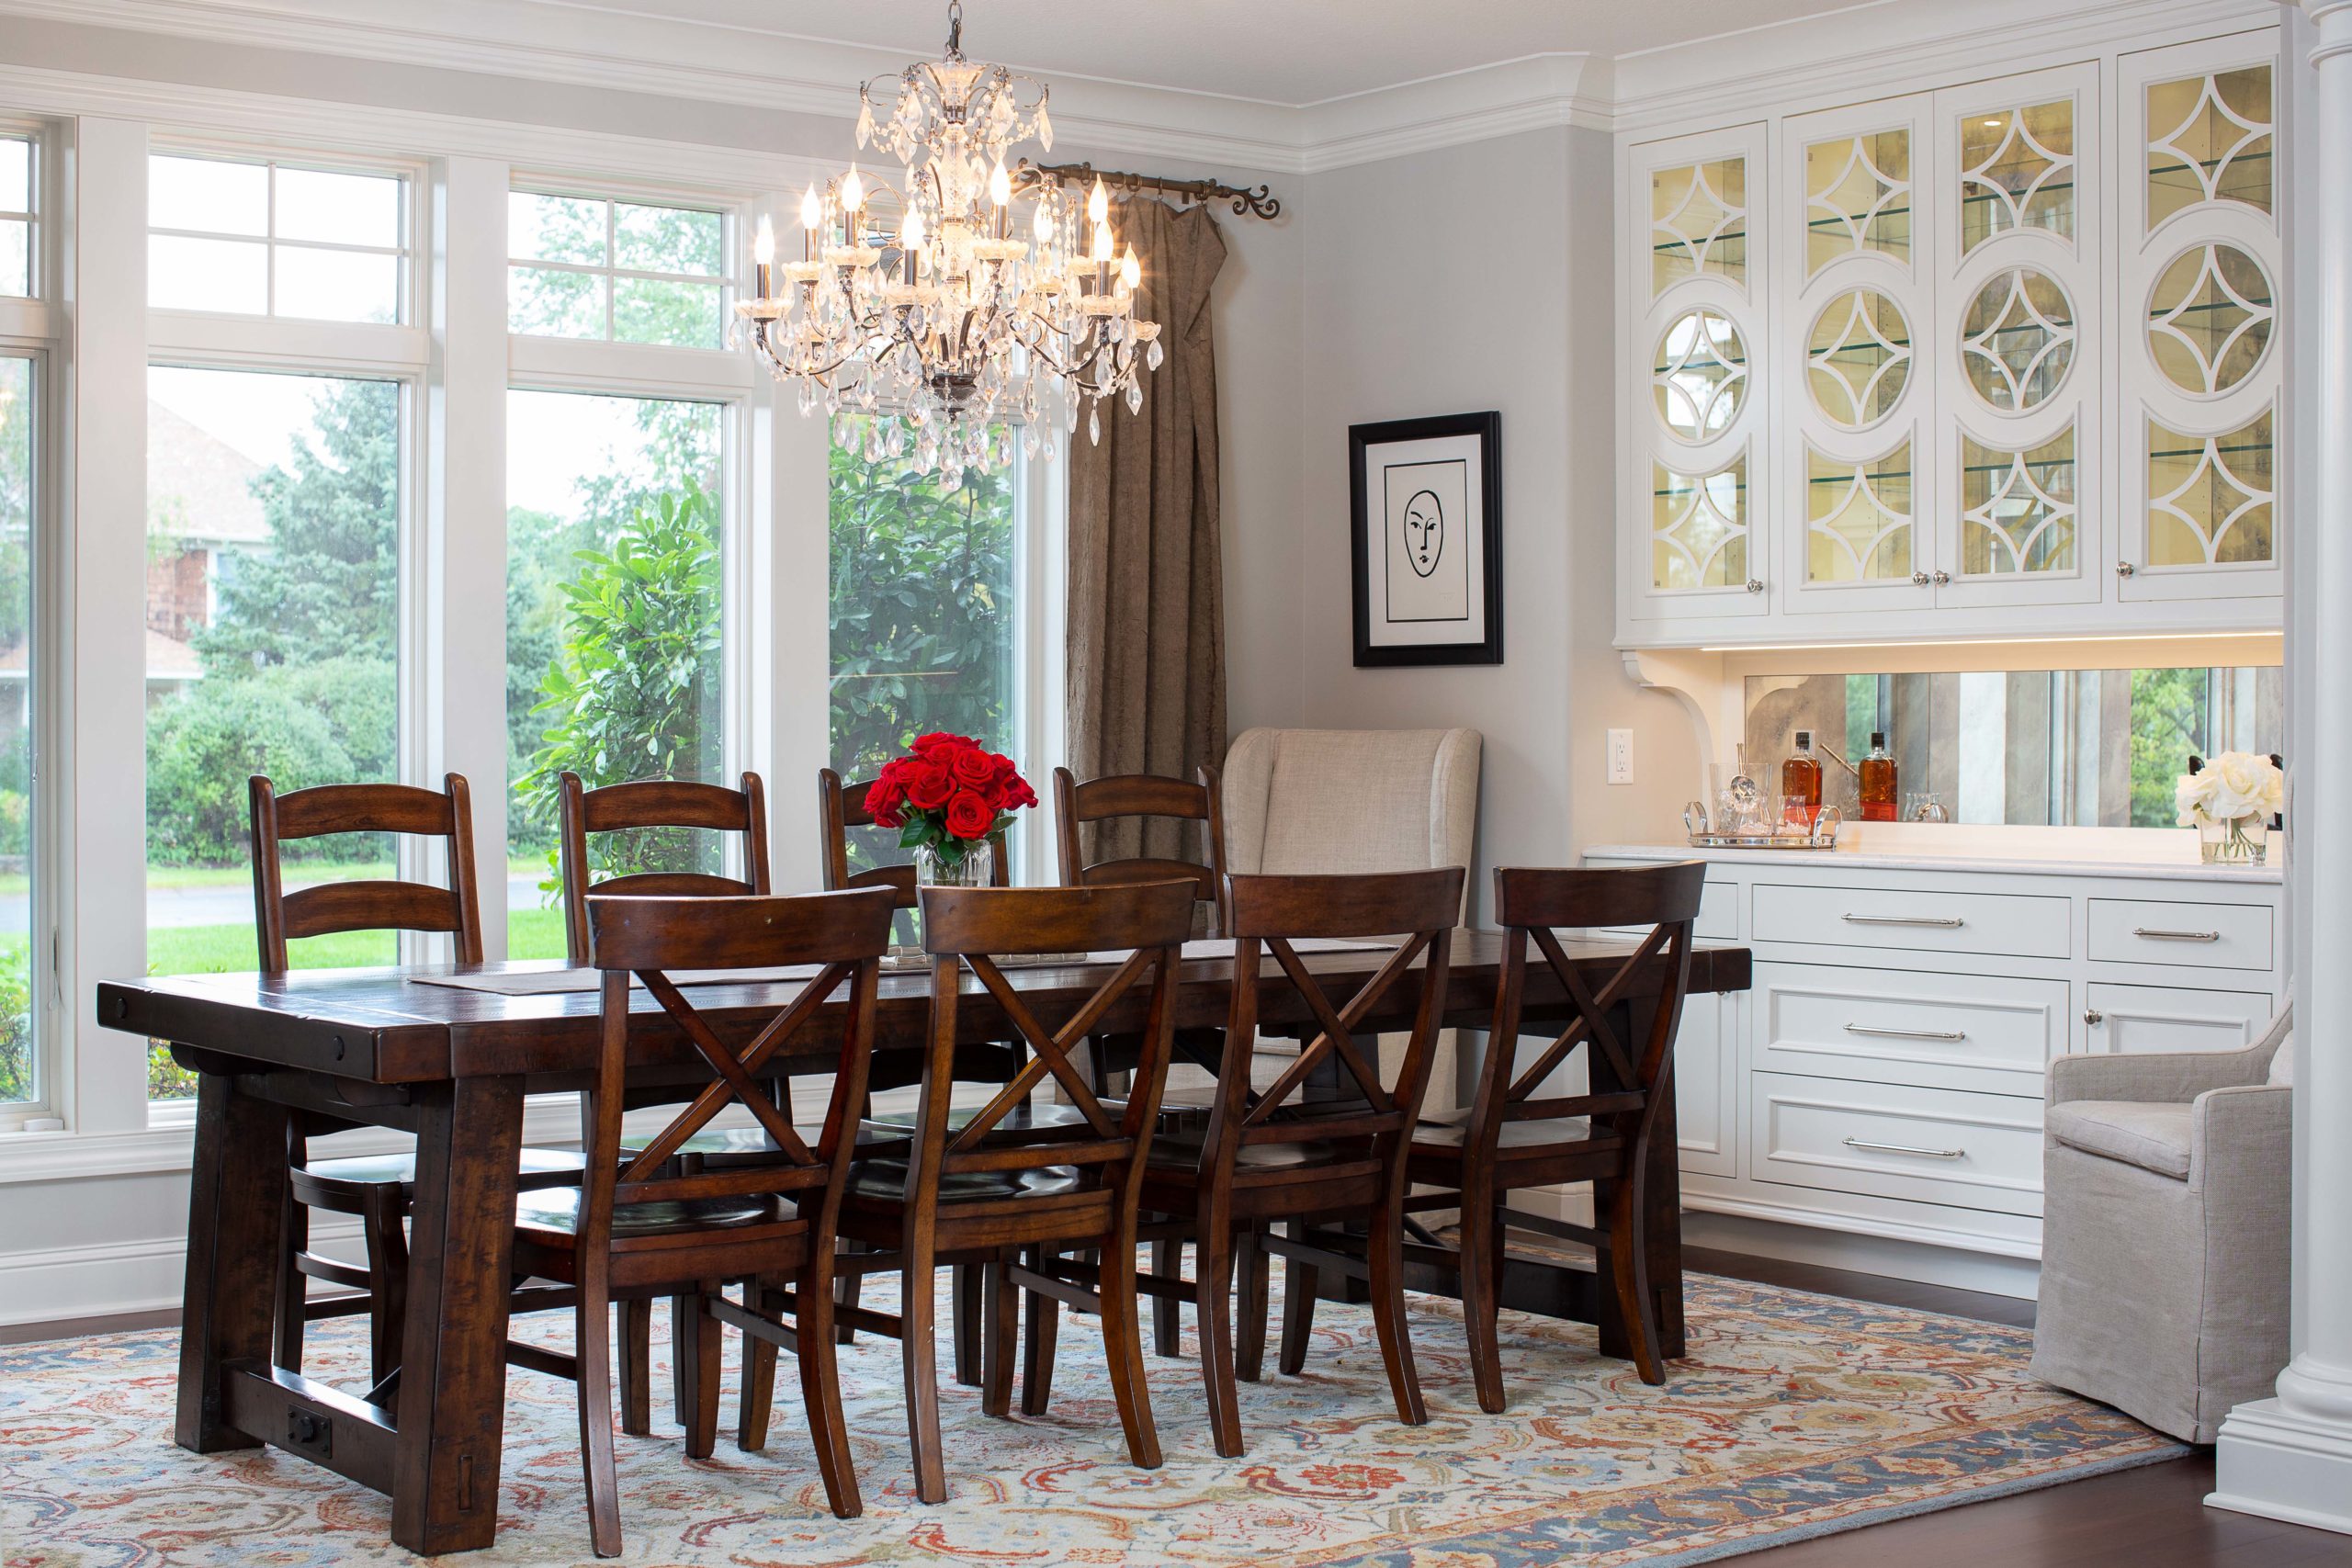 Dining room table with a chandelier hanging above and custom white cabinetry with custom grids